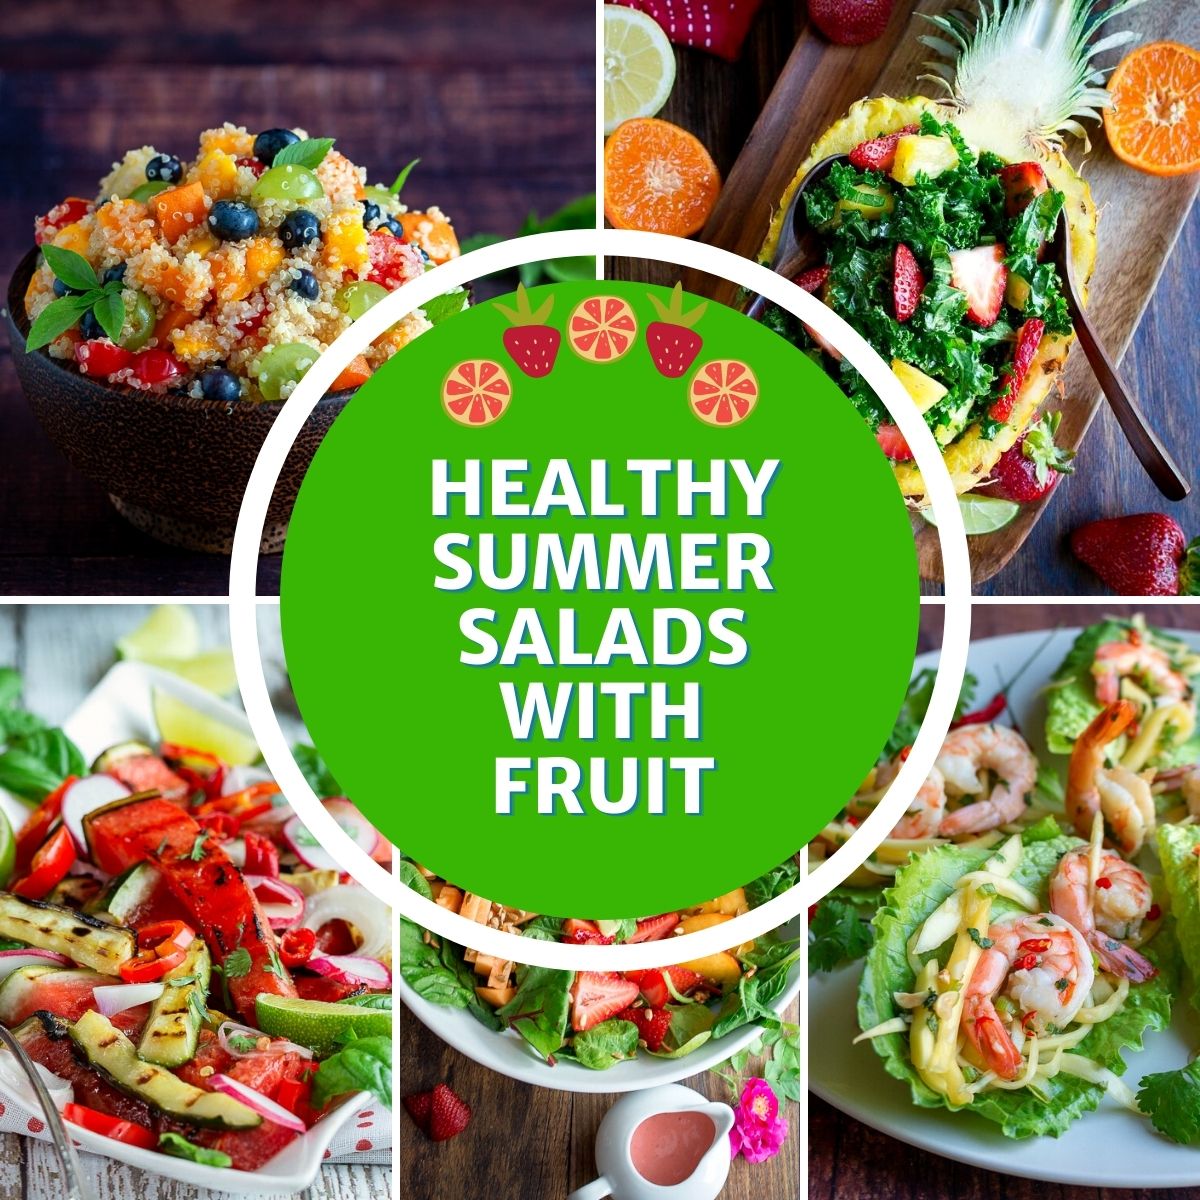 Healthy summer salads with fruits displaying 5 different recipes.